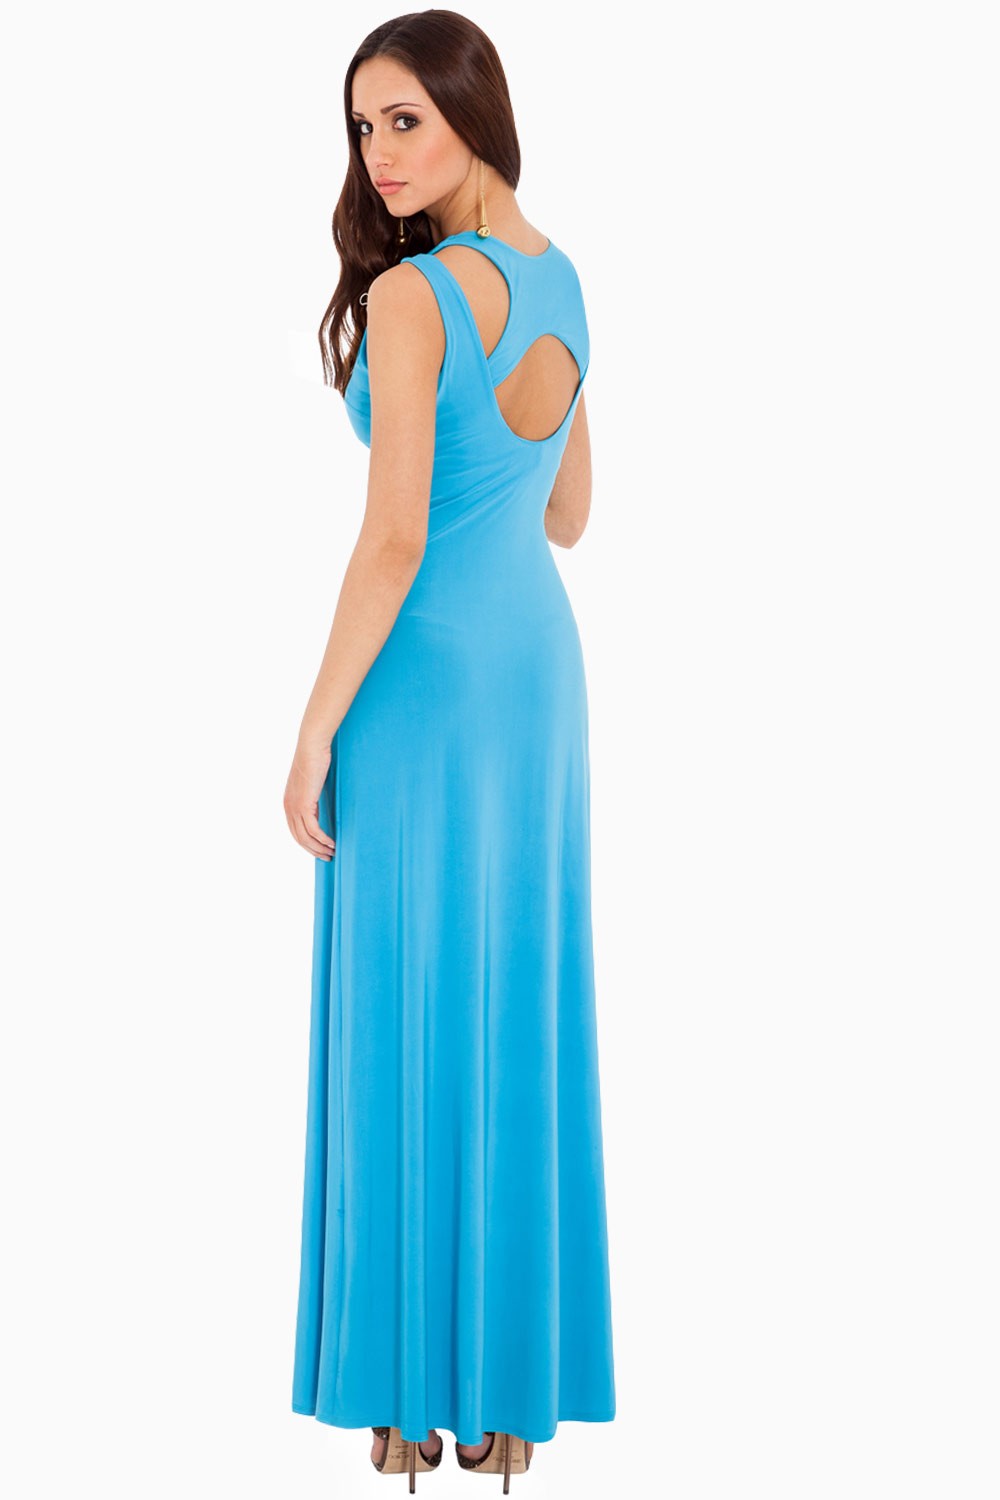 Denise Cut Out Racer Back Maxi Dress in Turquoise | iCLOTHING